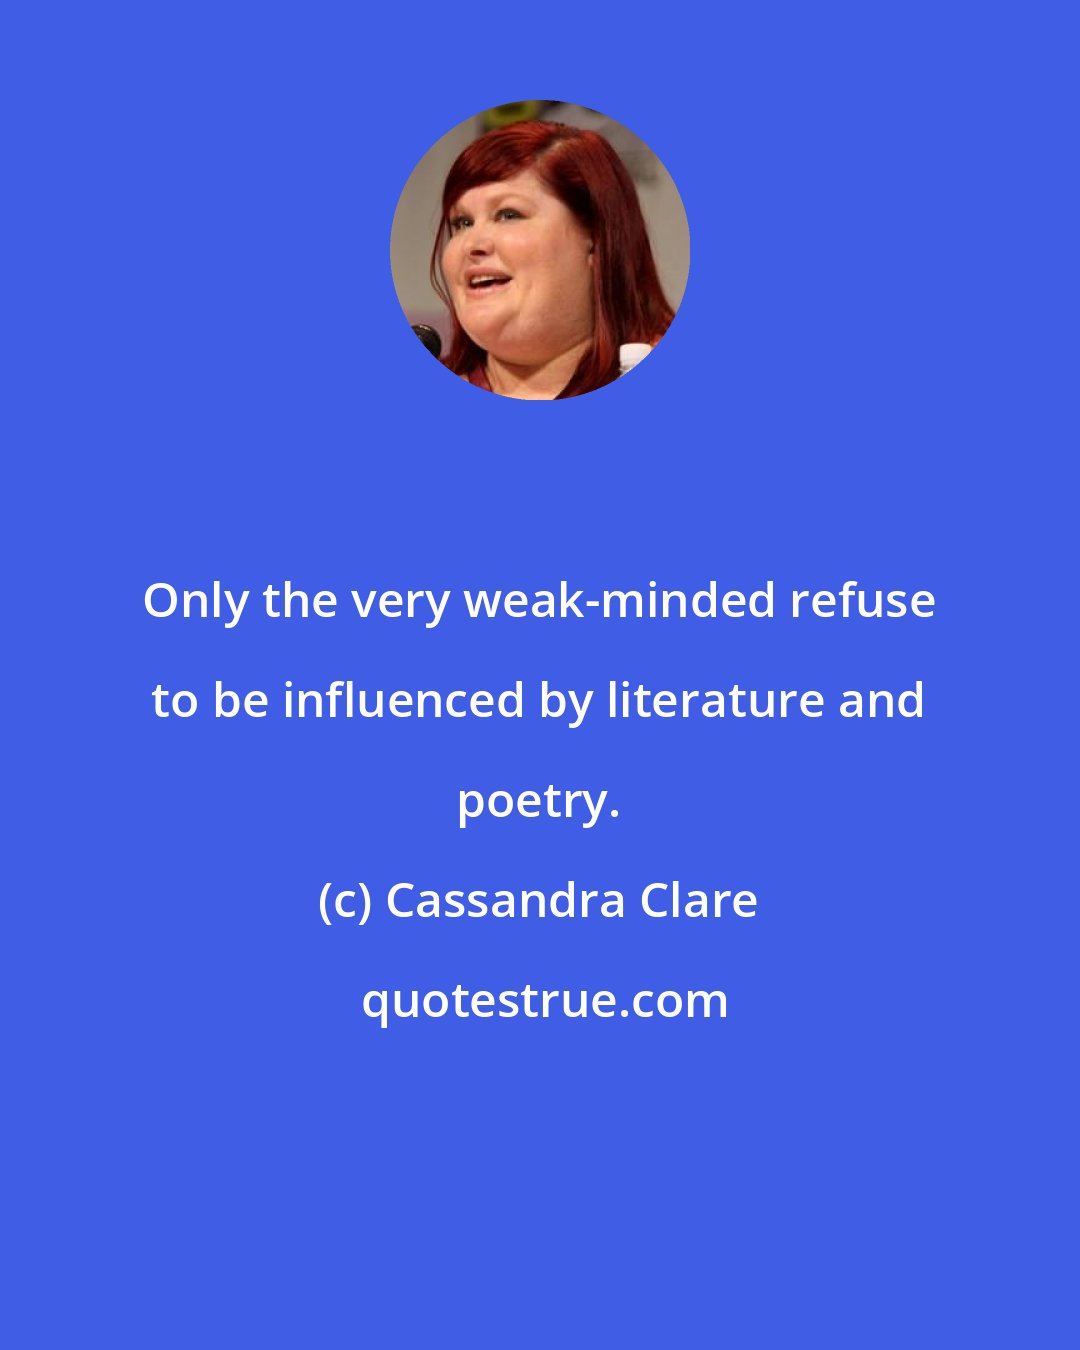 Cassandra Clare: Only the very weak-minded refuse to be influenced by literature and poetry.